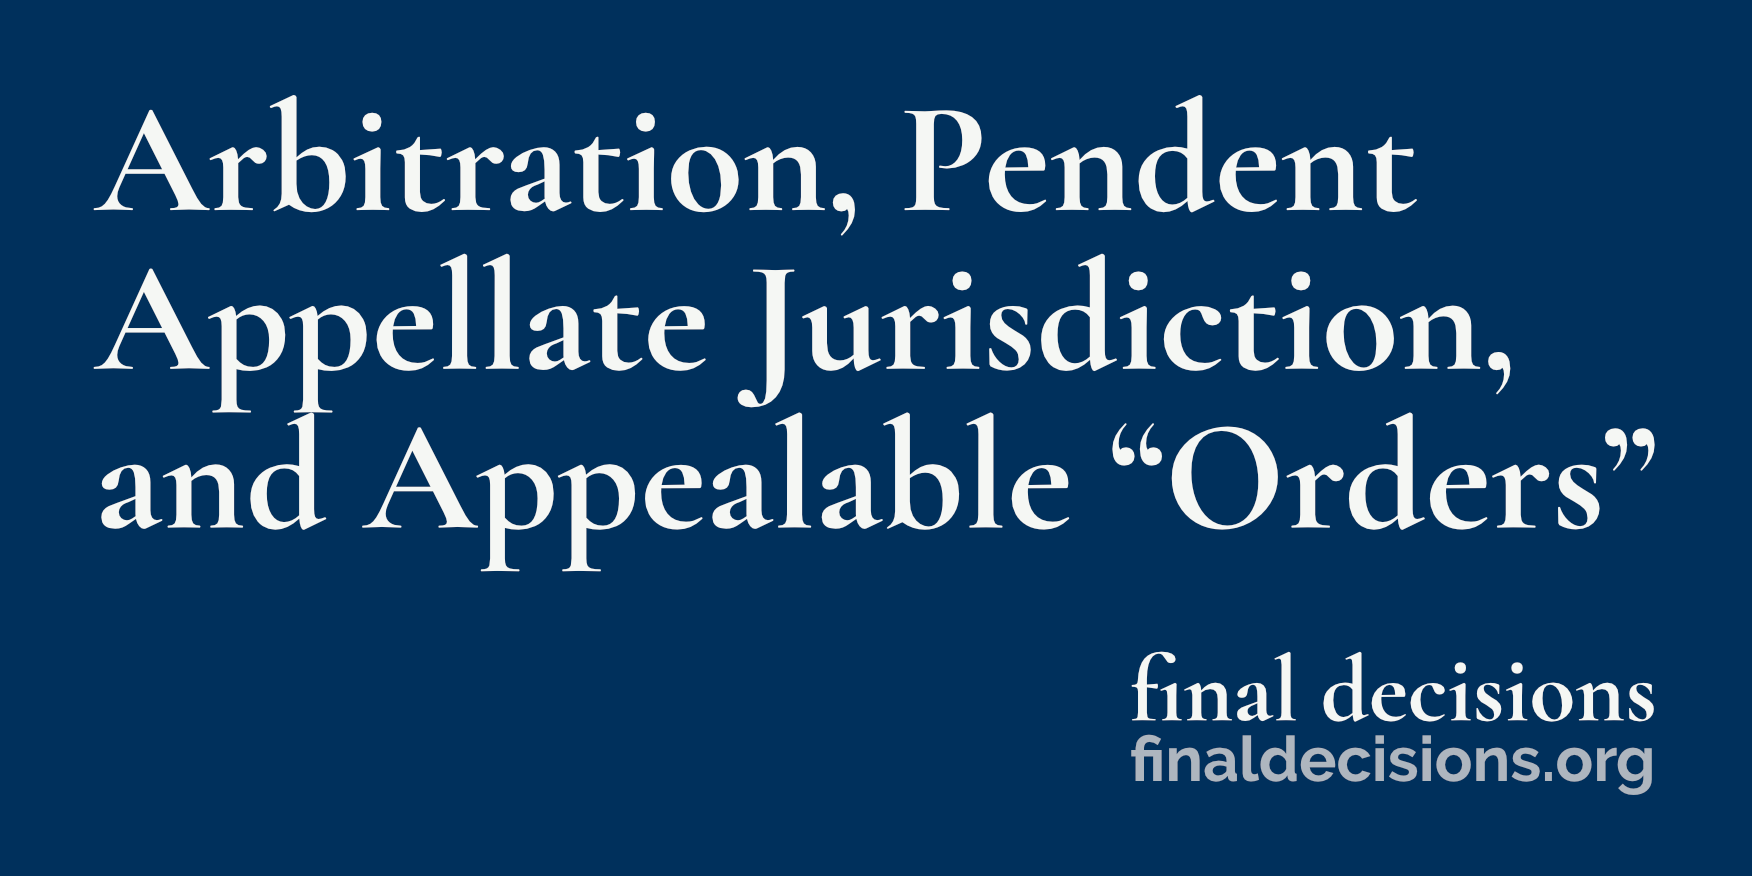 Arbitration Pendent Appellate Jurisdiction and Appealable Orders